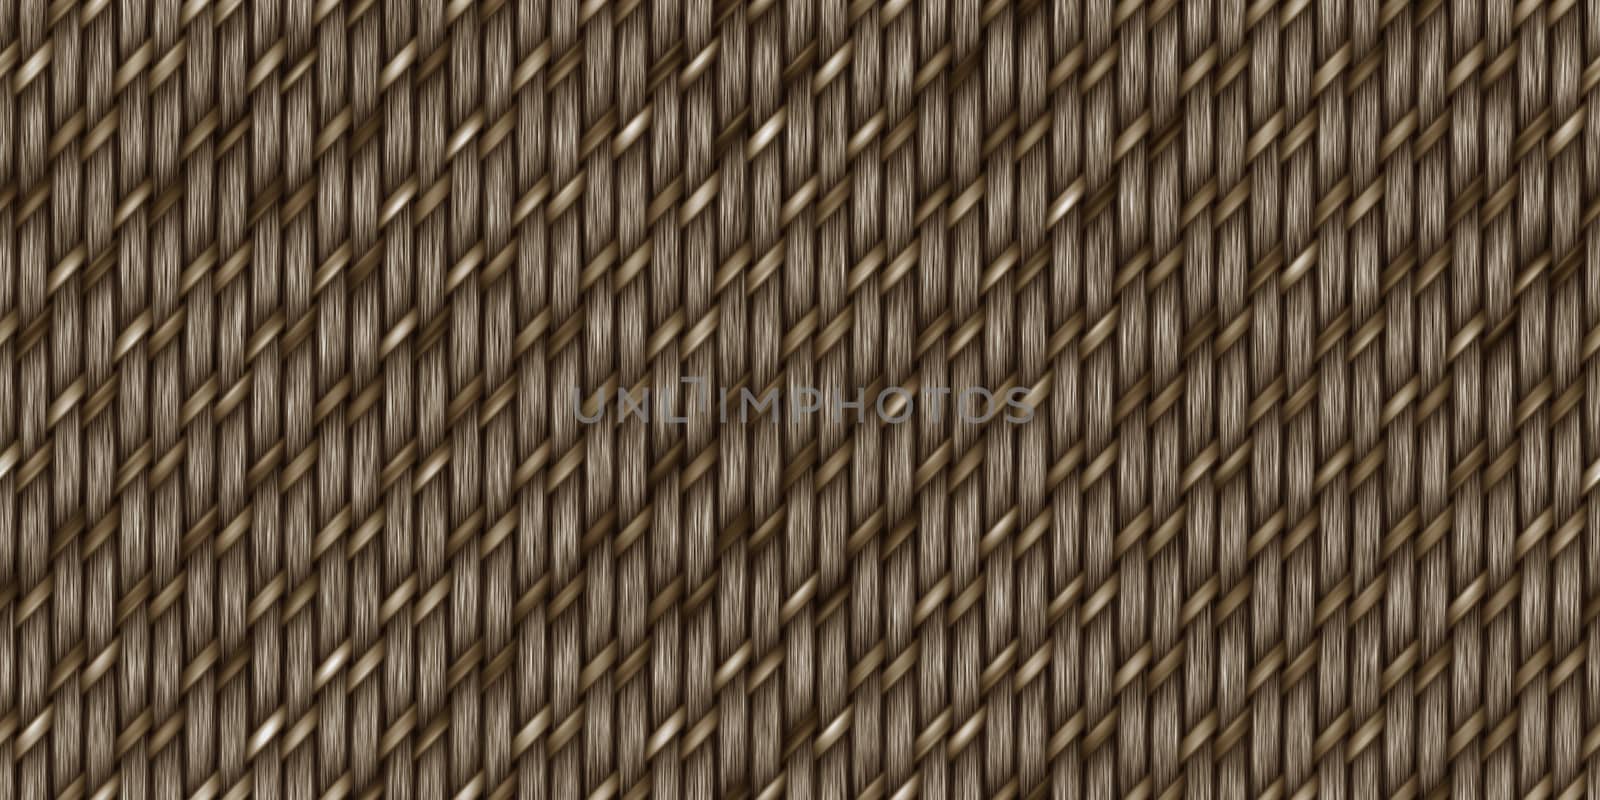 Brown Cross Weave Texture. Wicker Rattan Background Surface. 3D Rendering. 3D Illustration. by sanches812